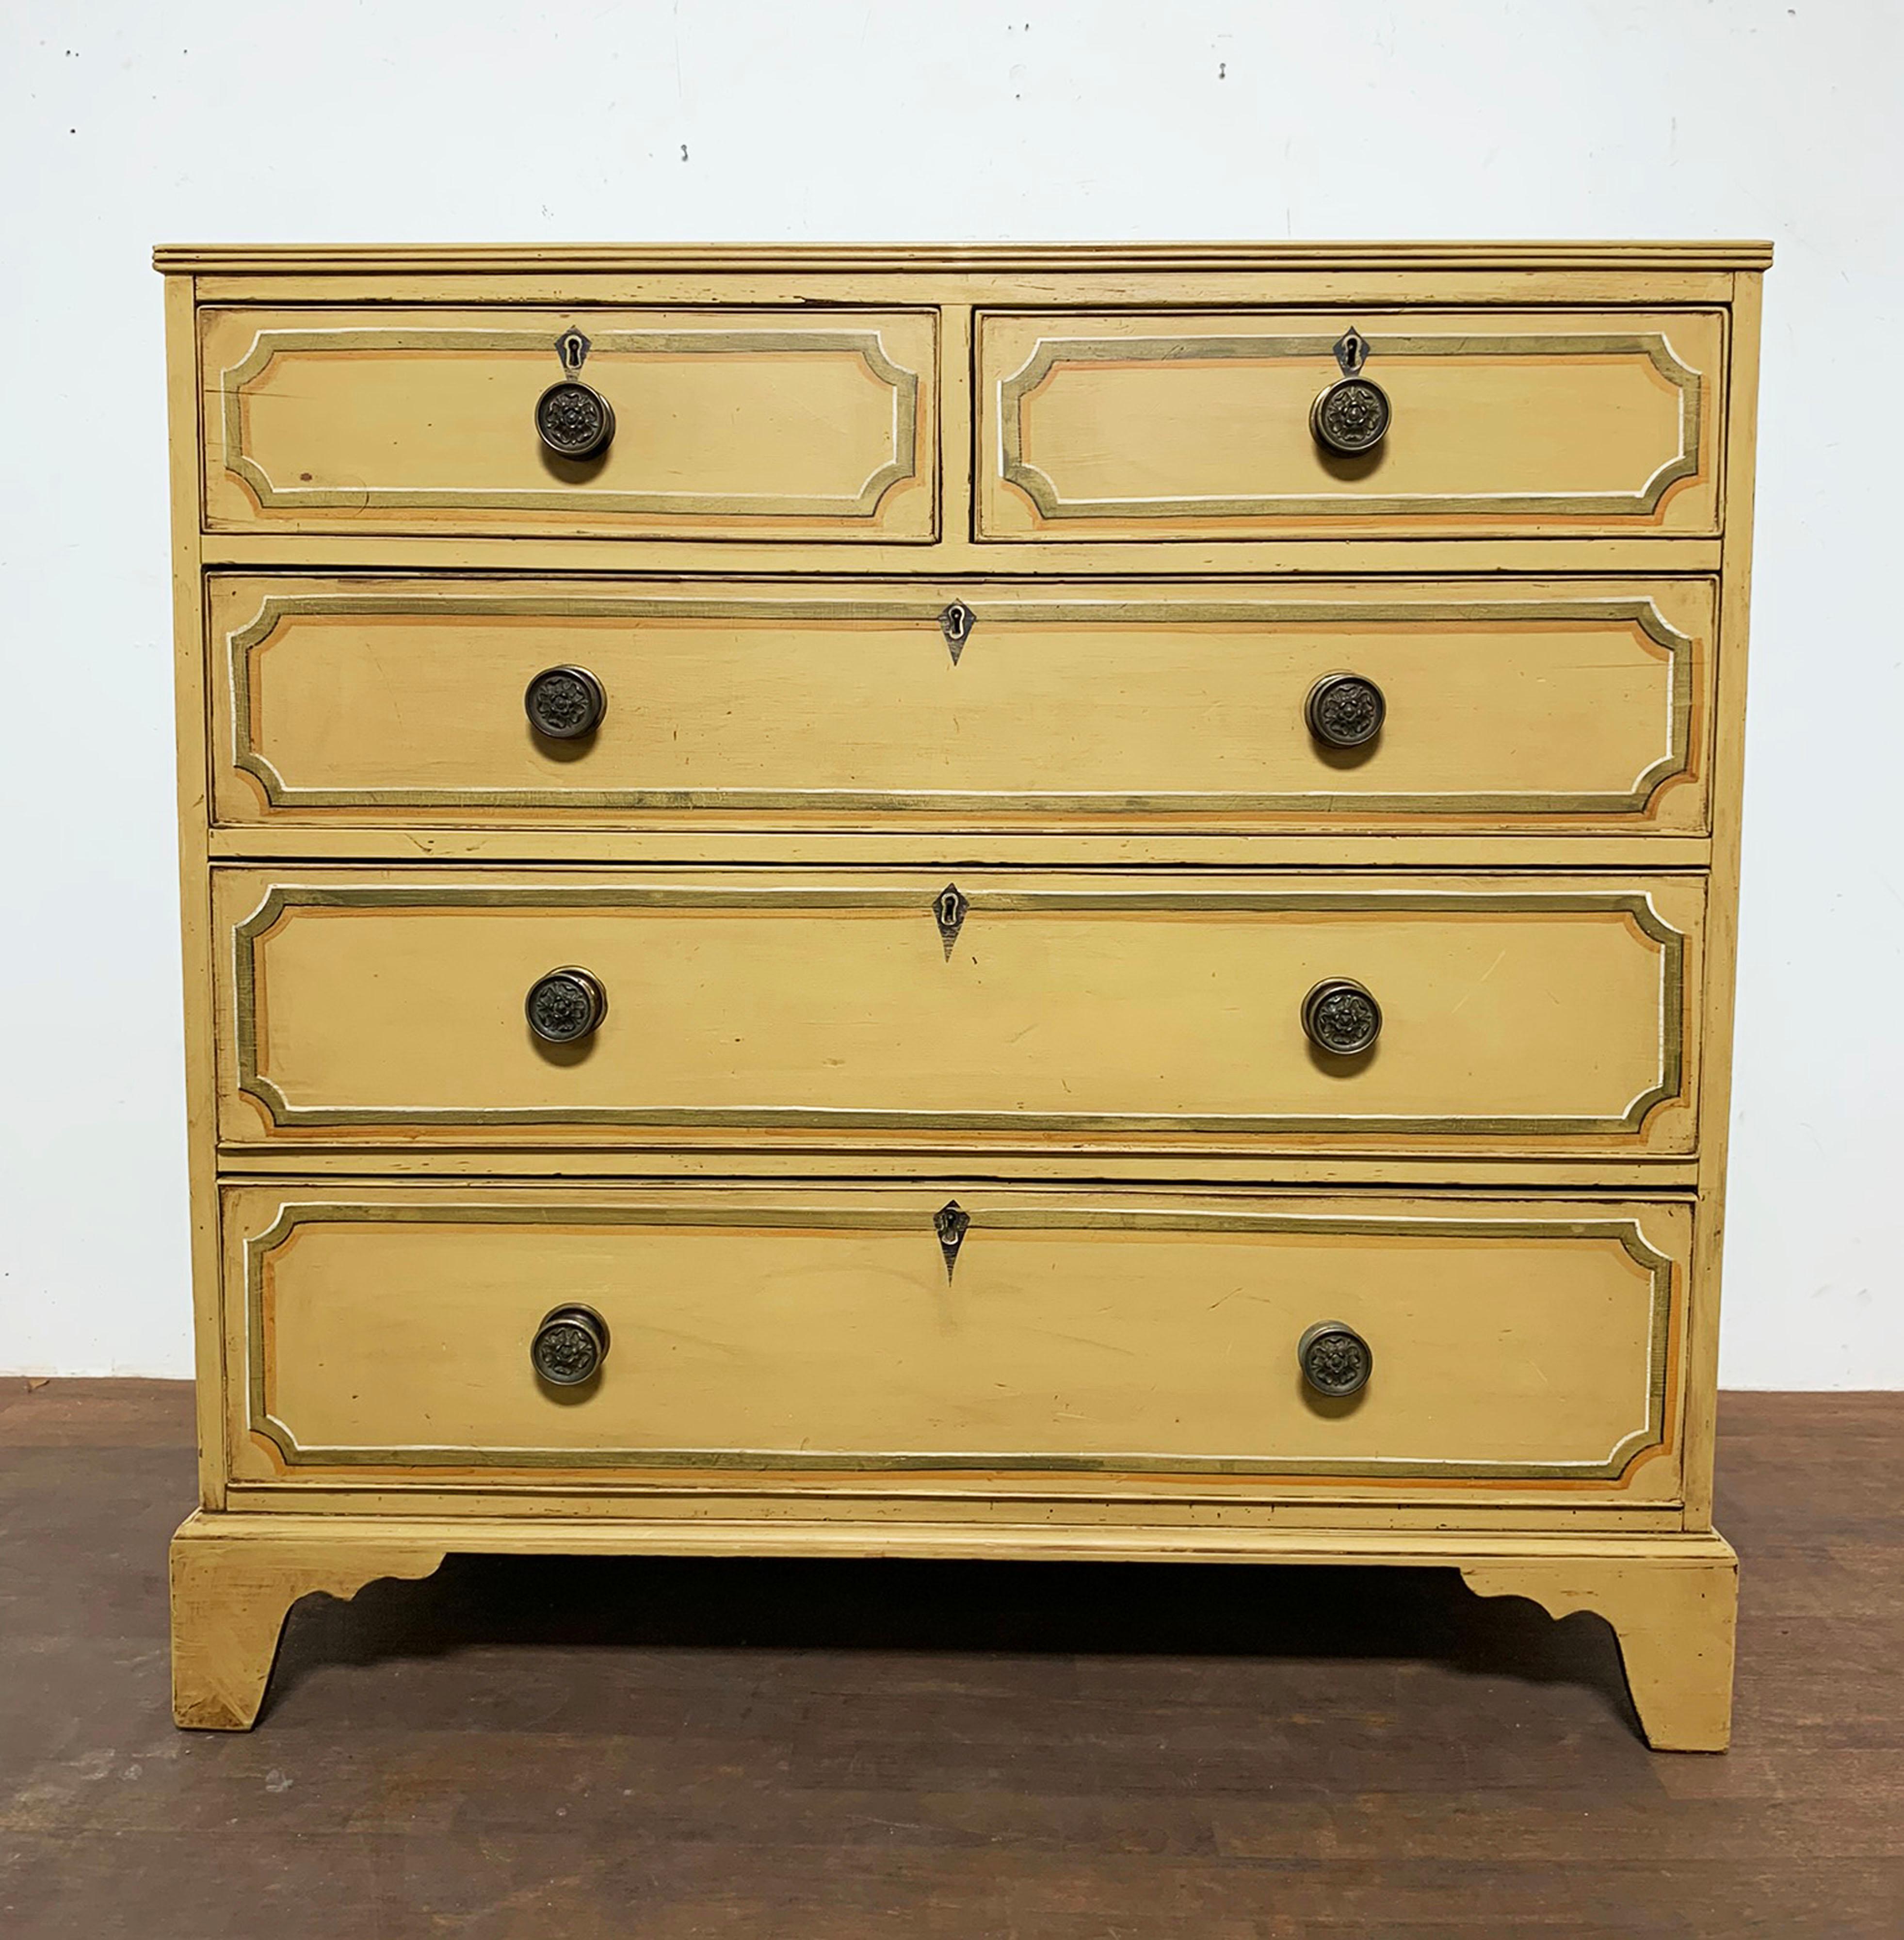 American Federal era chest of drawers in its original trompe l’oeil mustard painted finish, ca. 1820.